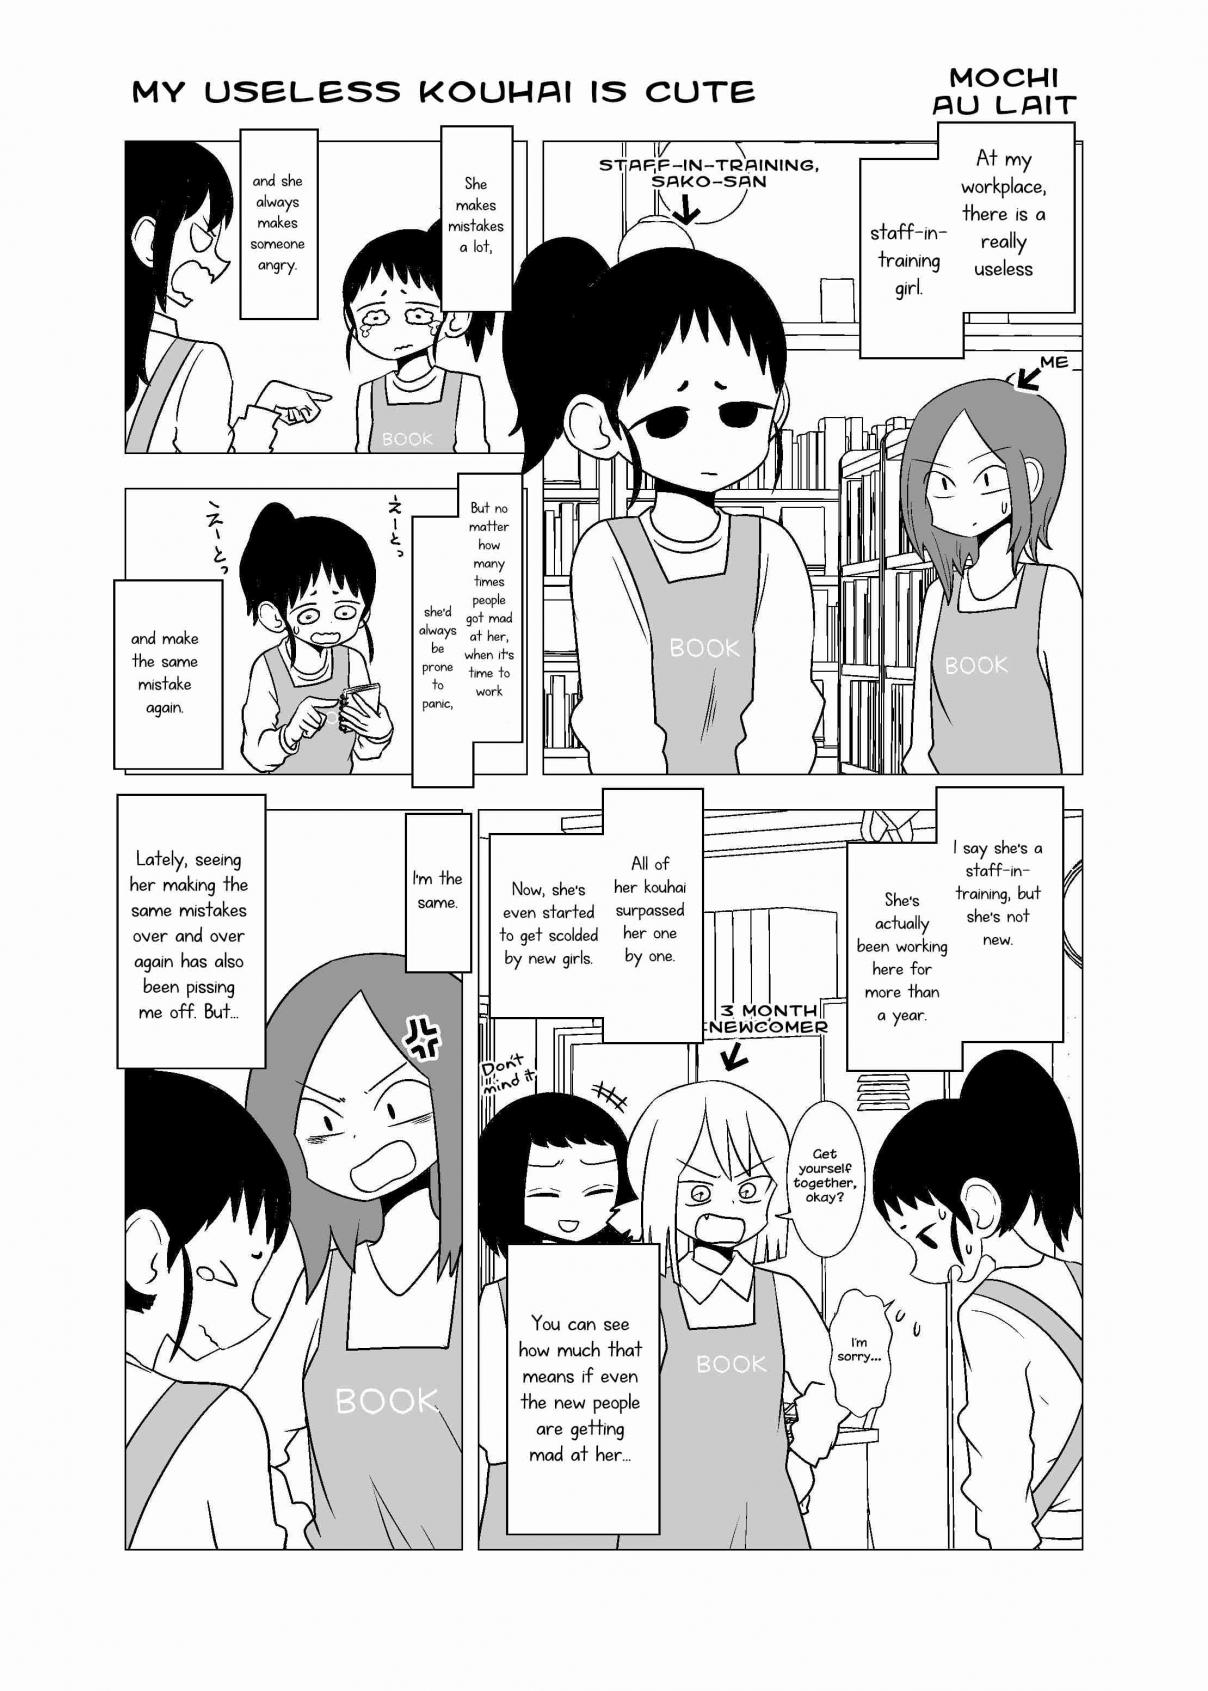 A Socially Awkward Girl Got Kissed By A Kouhai She Never Talked To Once Before Ch. 3 My Useless Kouhai is Cute